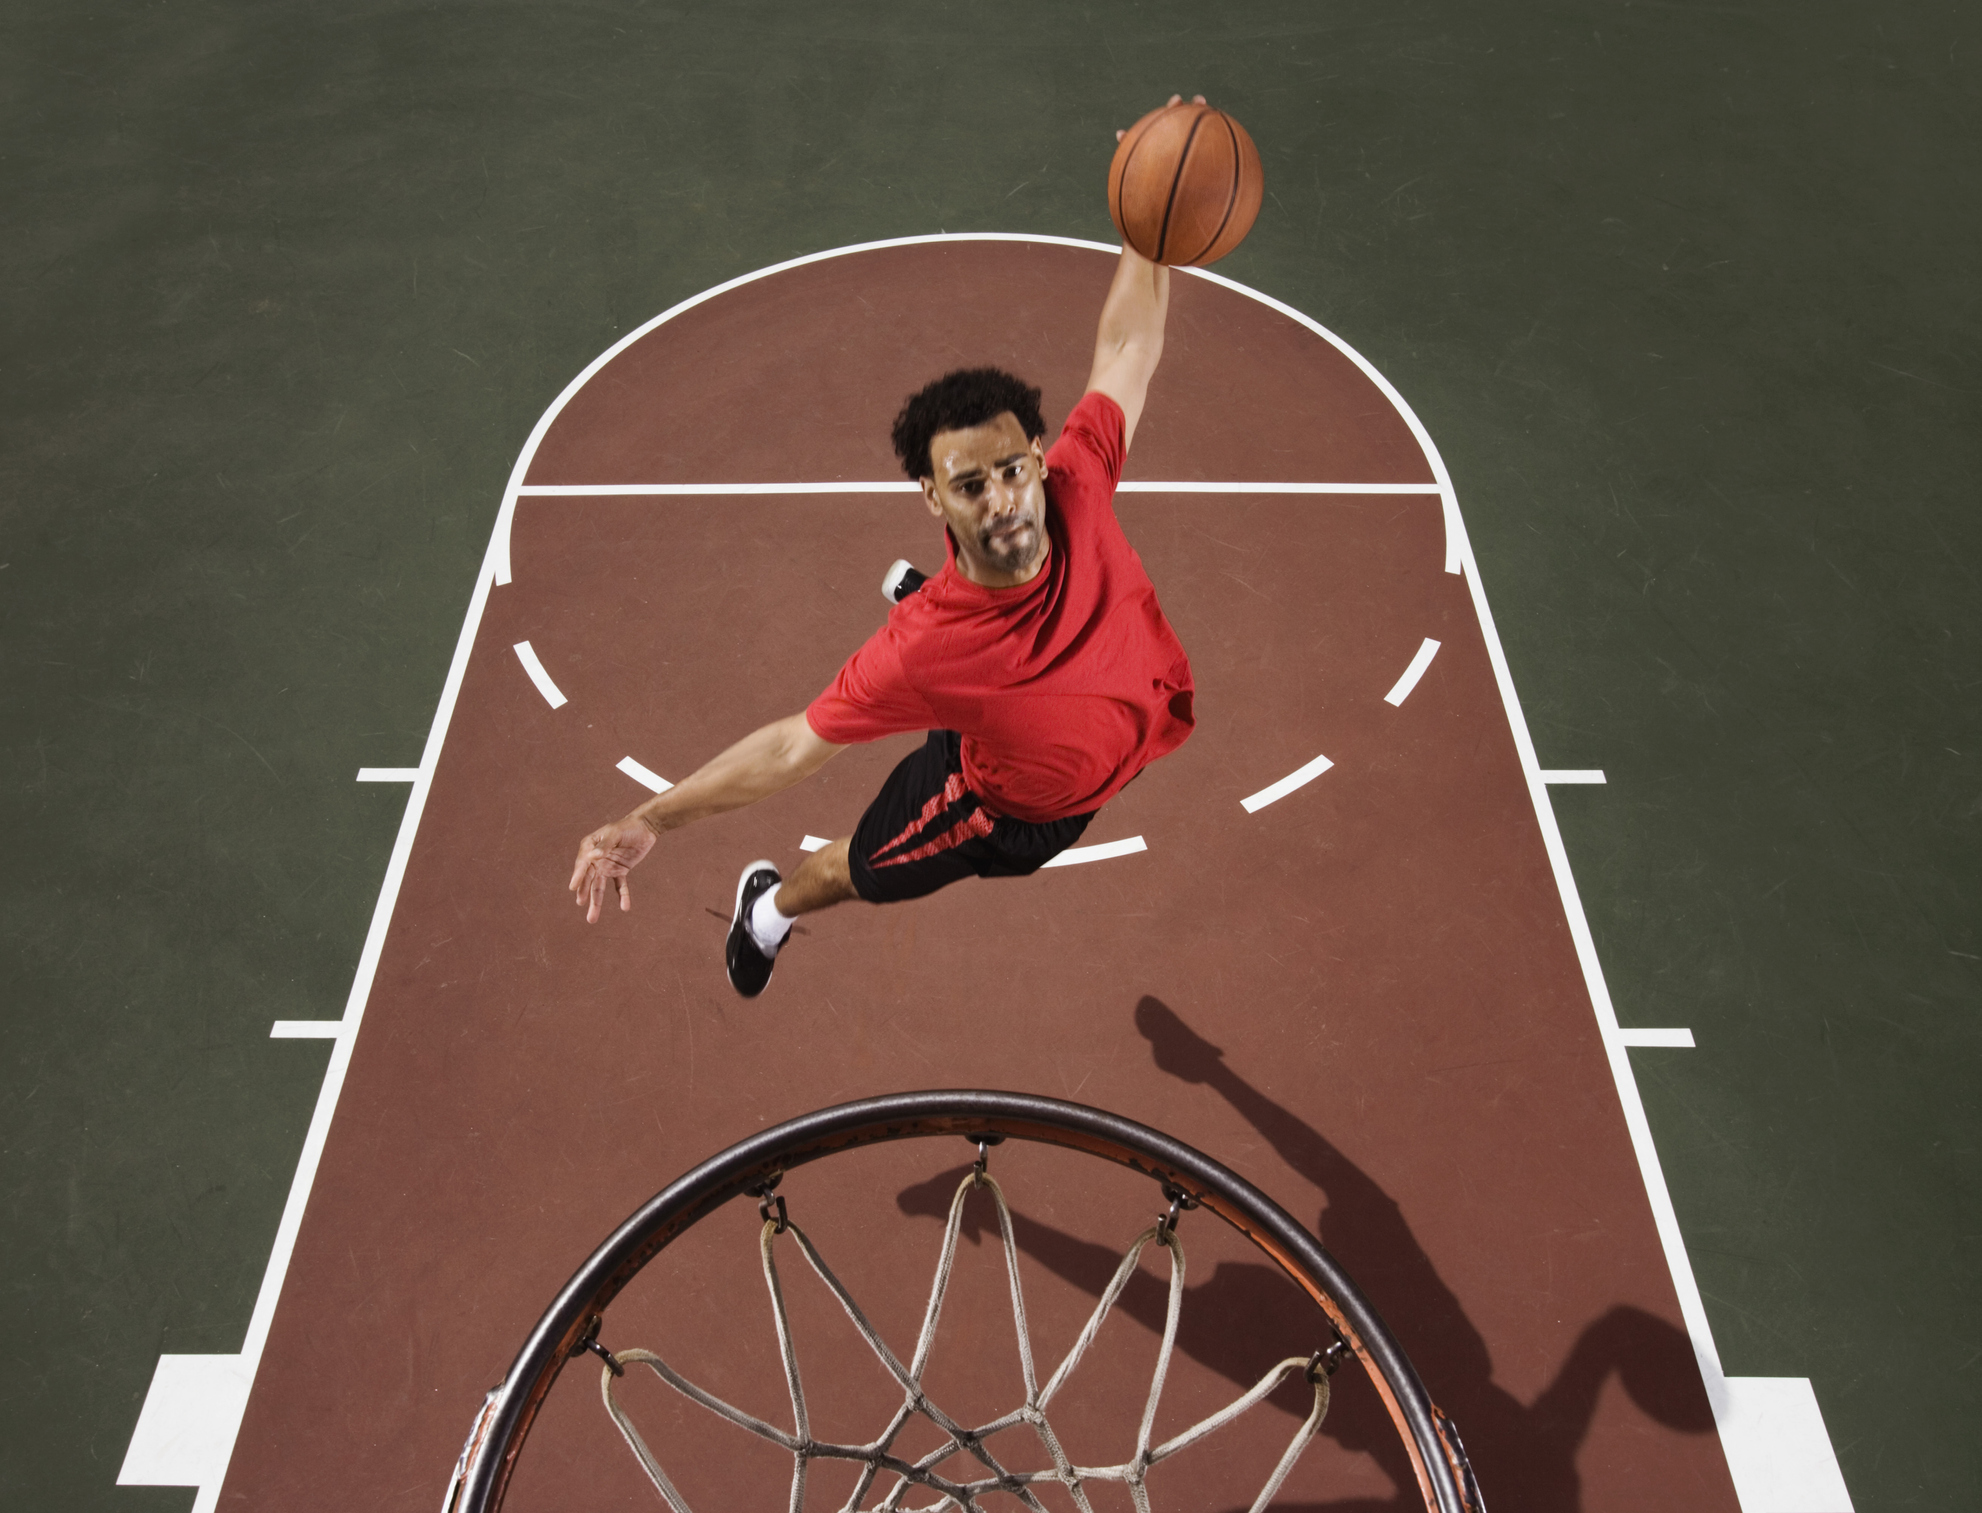 An individual in red attire jumping up to slam dunk a basketball.